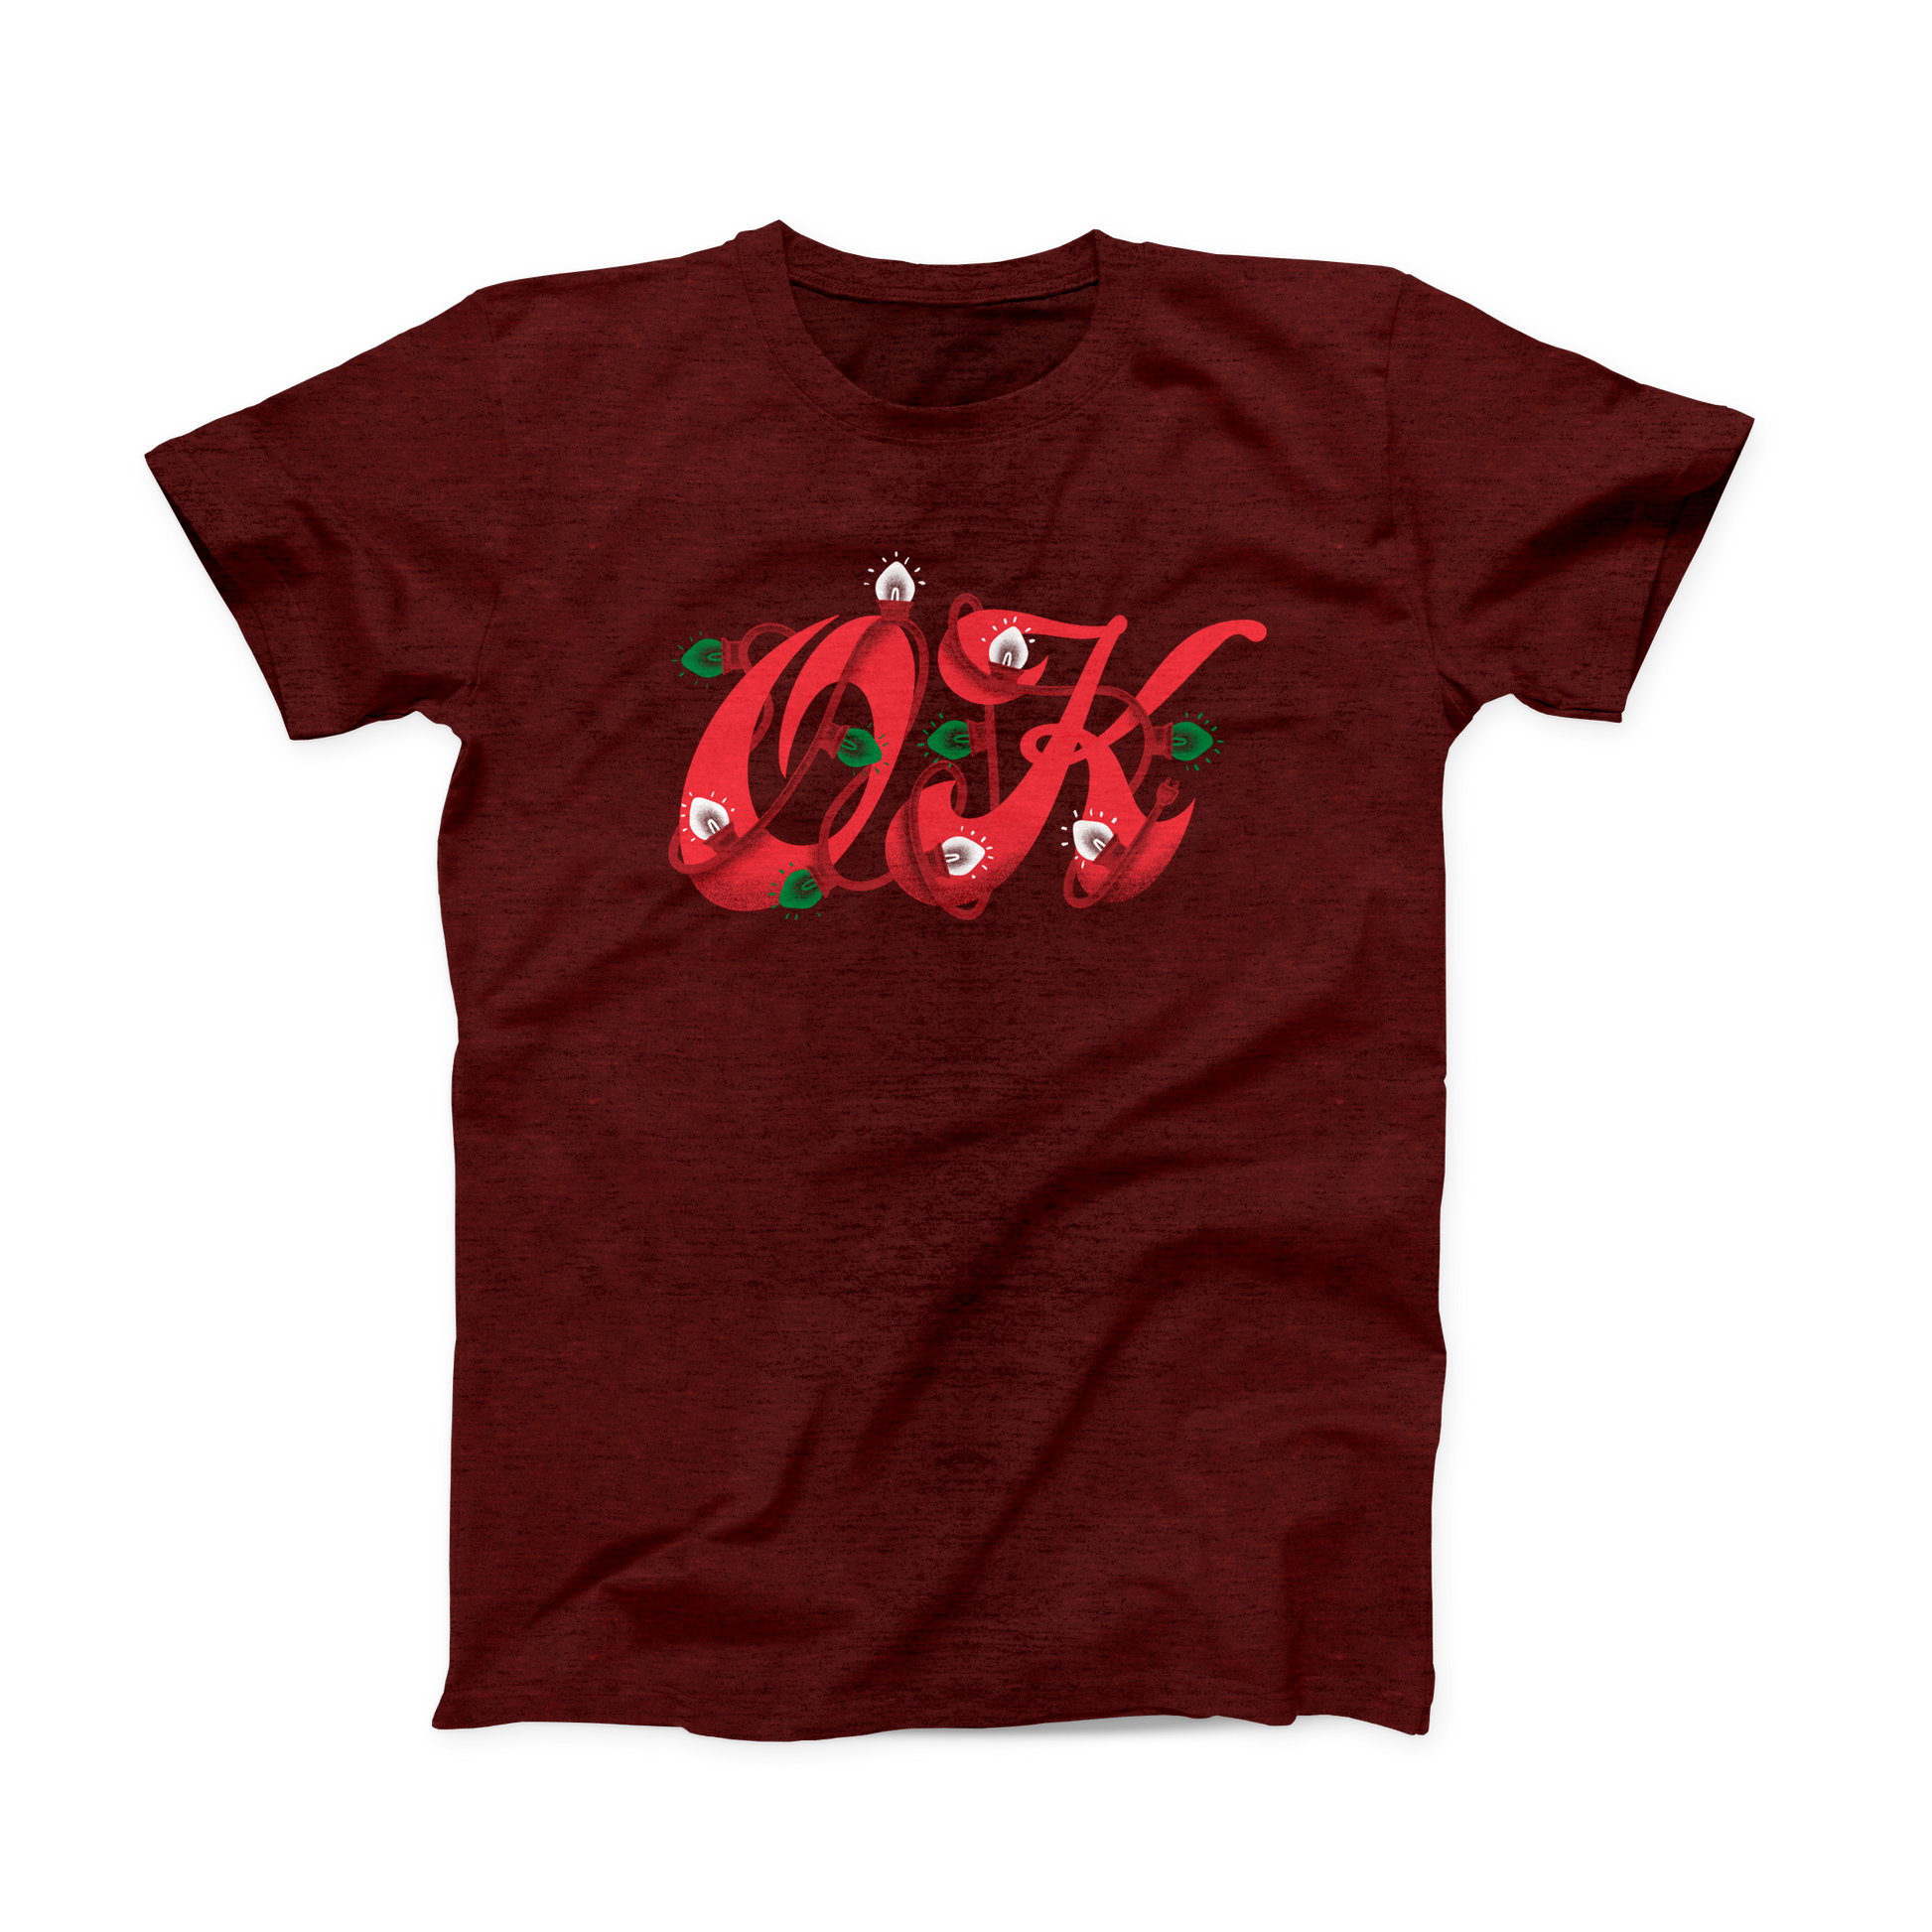 Heather Cardinal colored Oklahoma T-shirt. Design is a red, script-like "OK" wrapped up in string lights of green and white. 